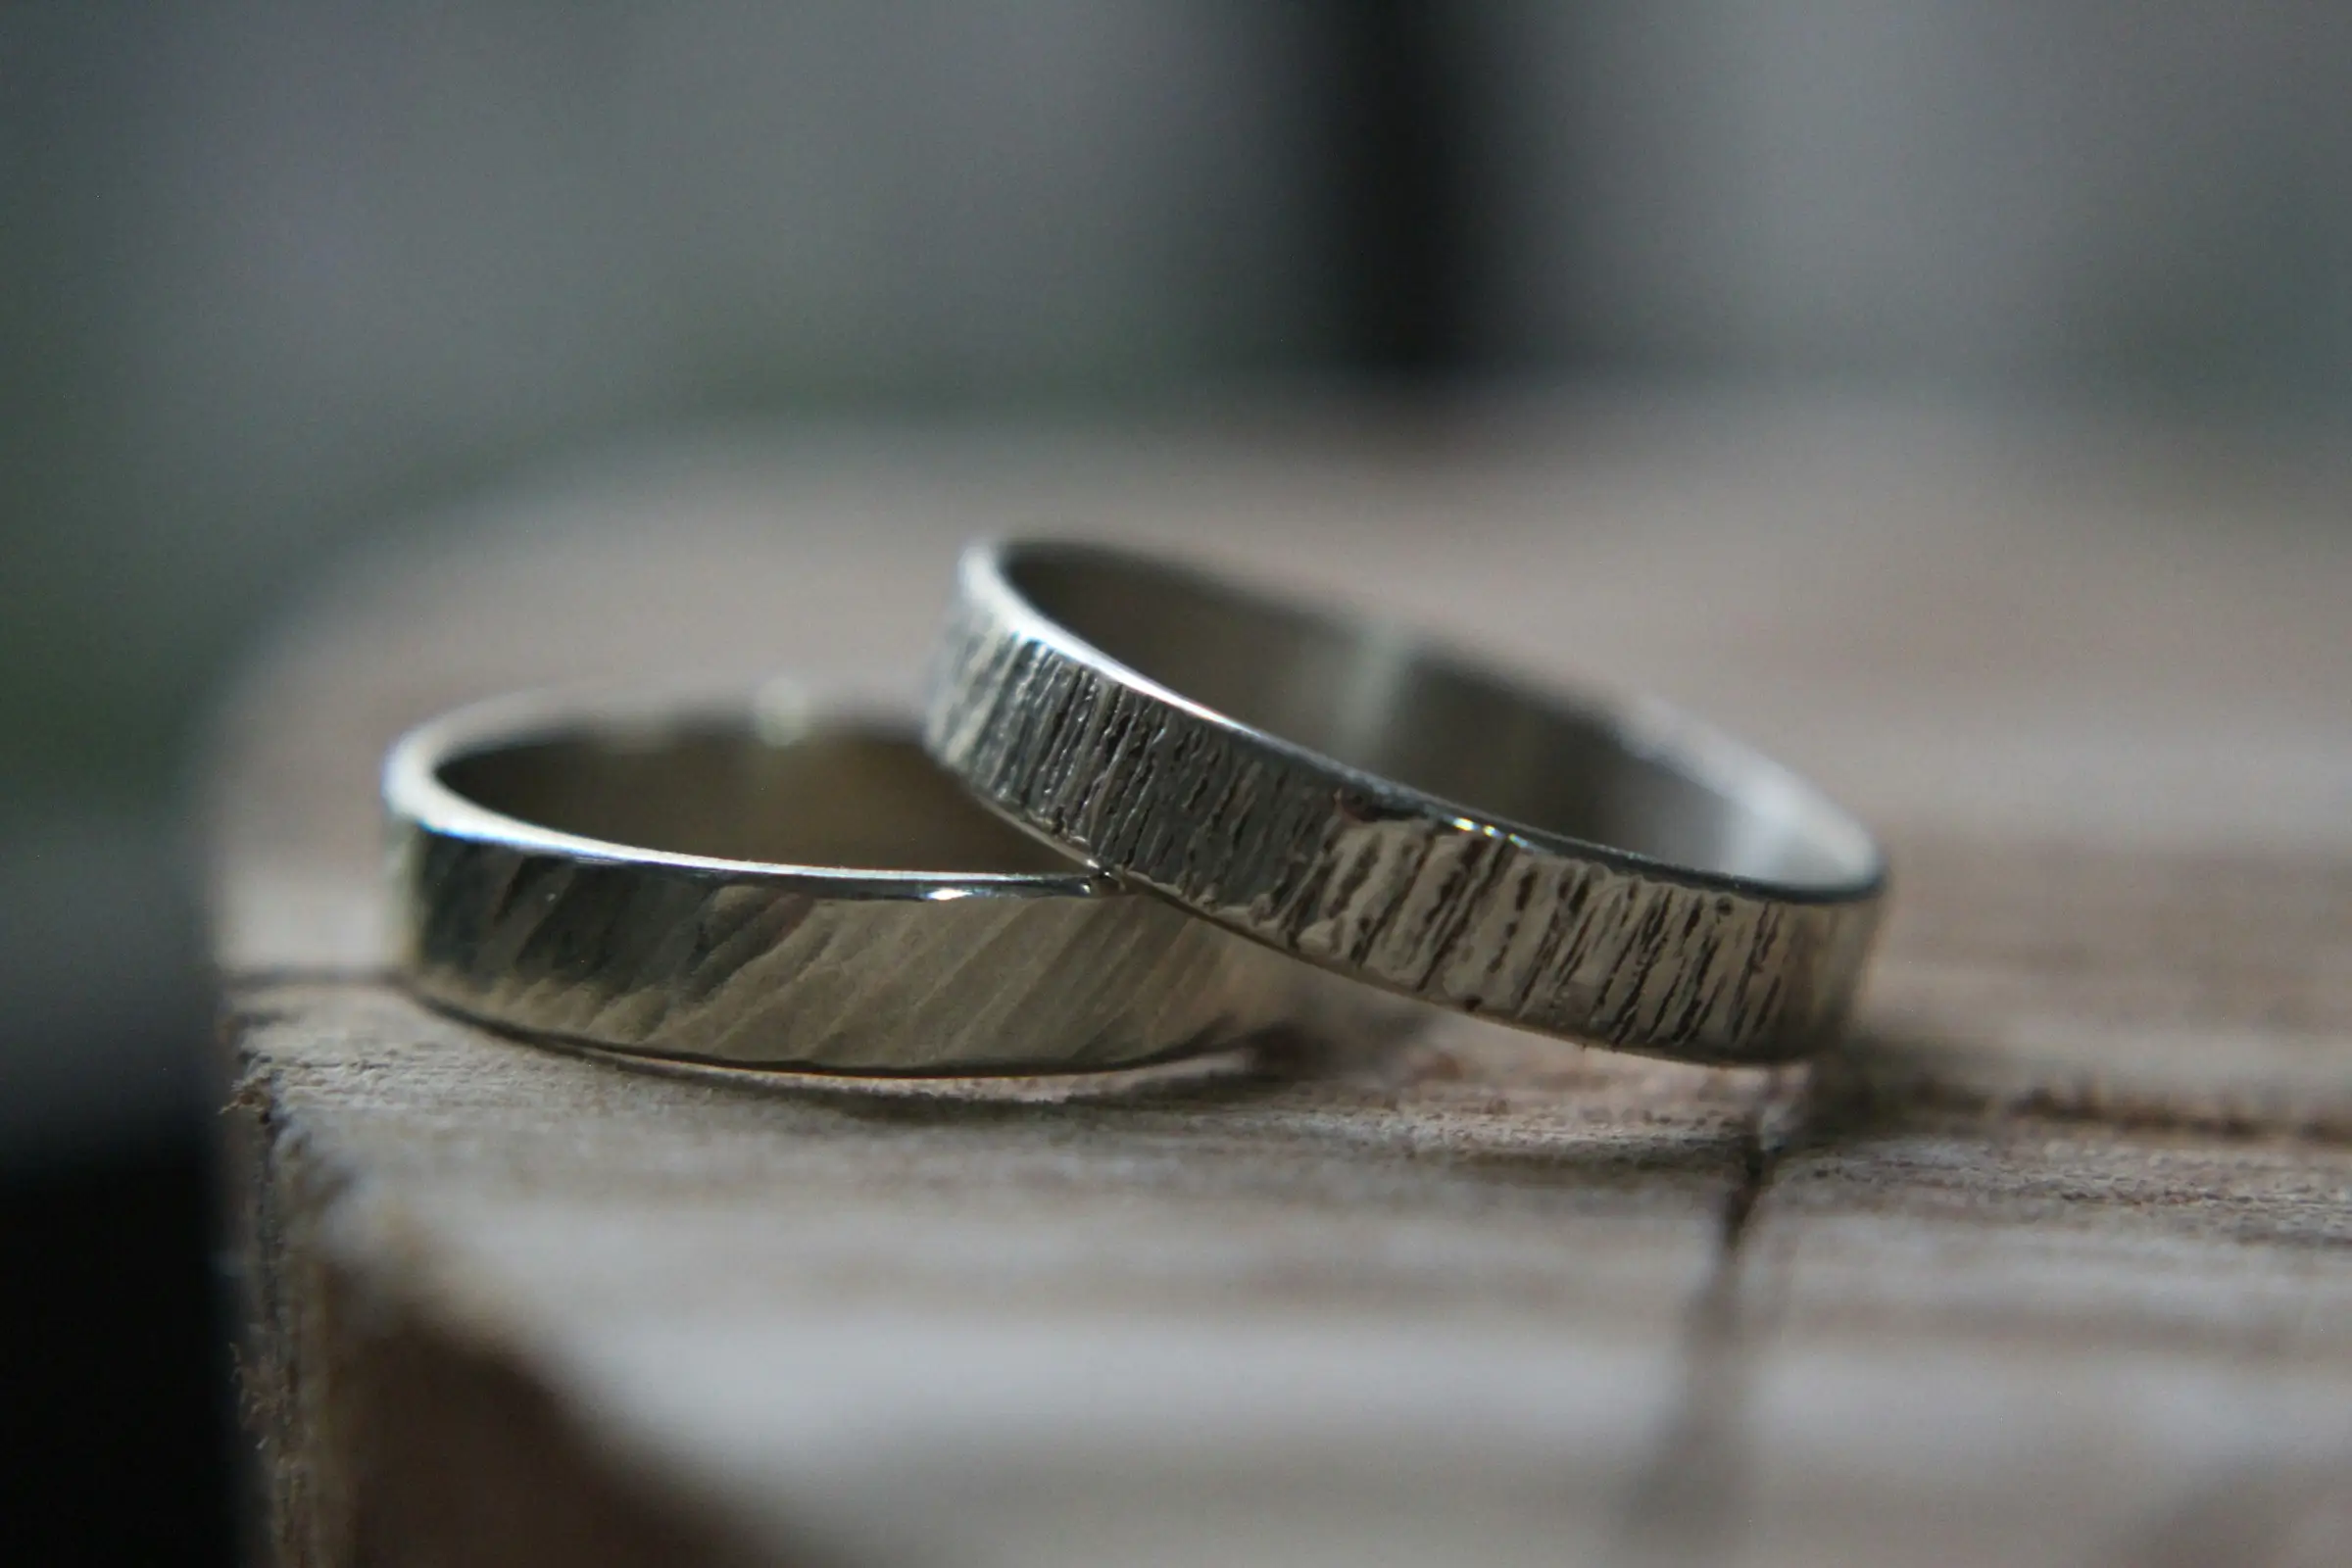 Stainless Steel Jewelry: Pros and Cons